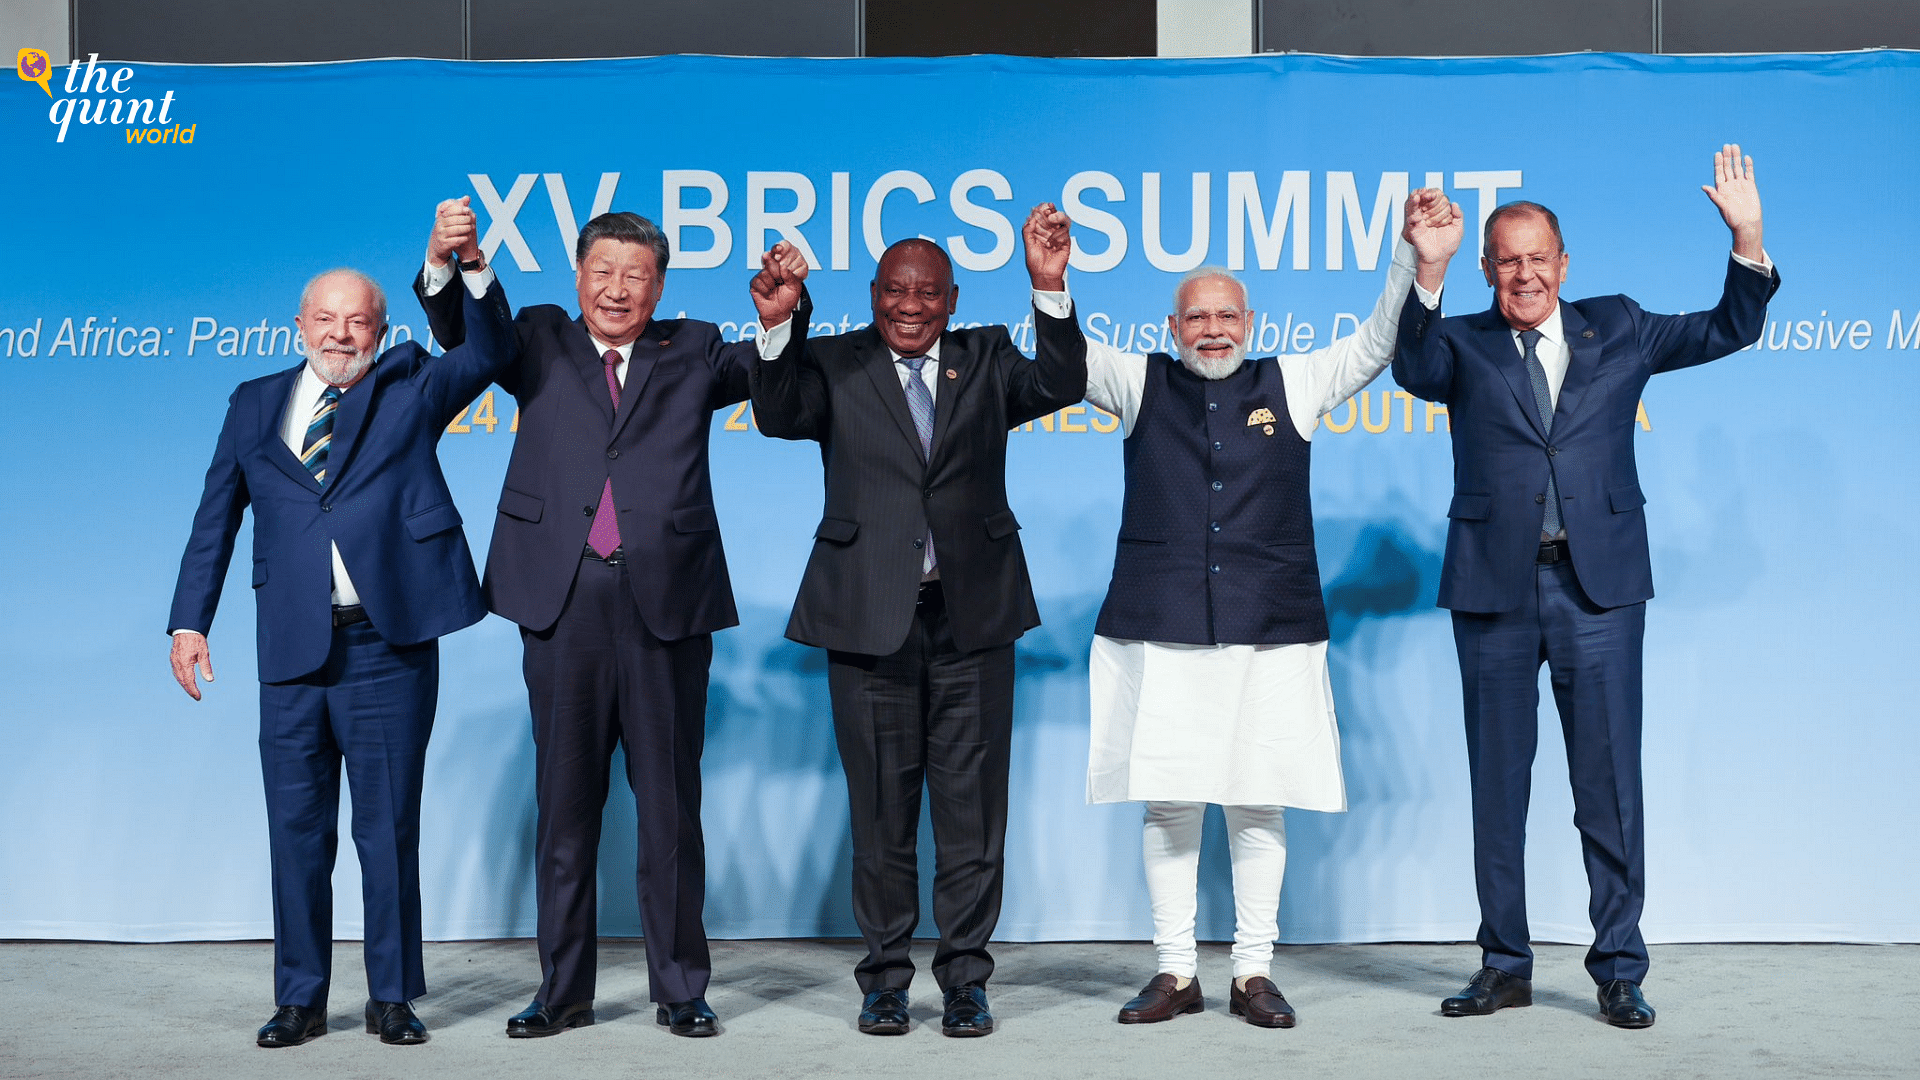 <div class="paragraphs"><p>Following a day of deliberations and discussions during the BRICS Summit, South African President Cyril Ramaphosa addressed a press conference alongside fellow world leaders and invited six new countries to join the bloc</p></div>